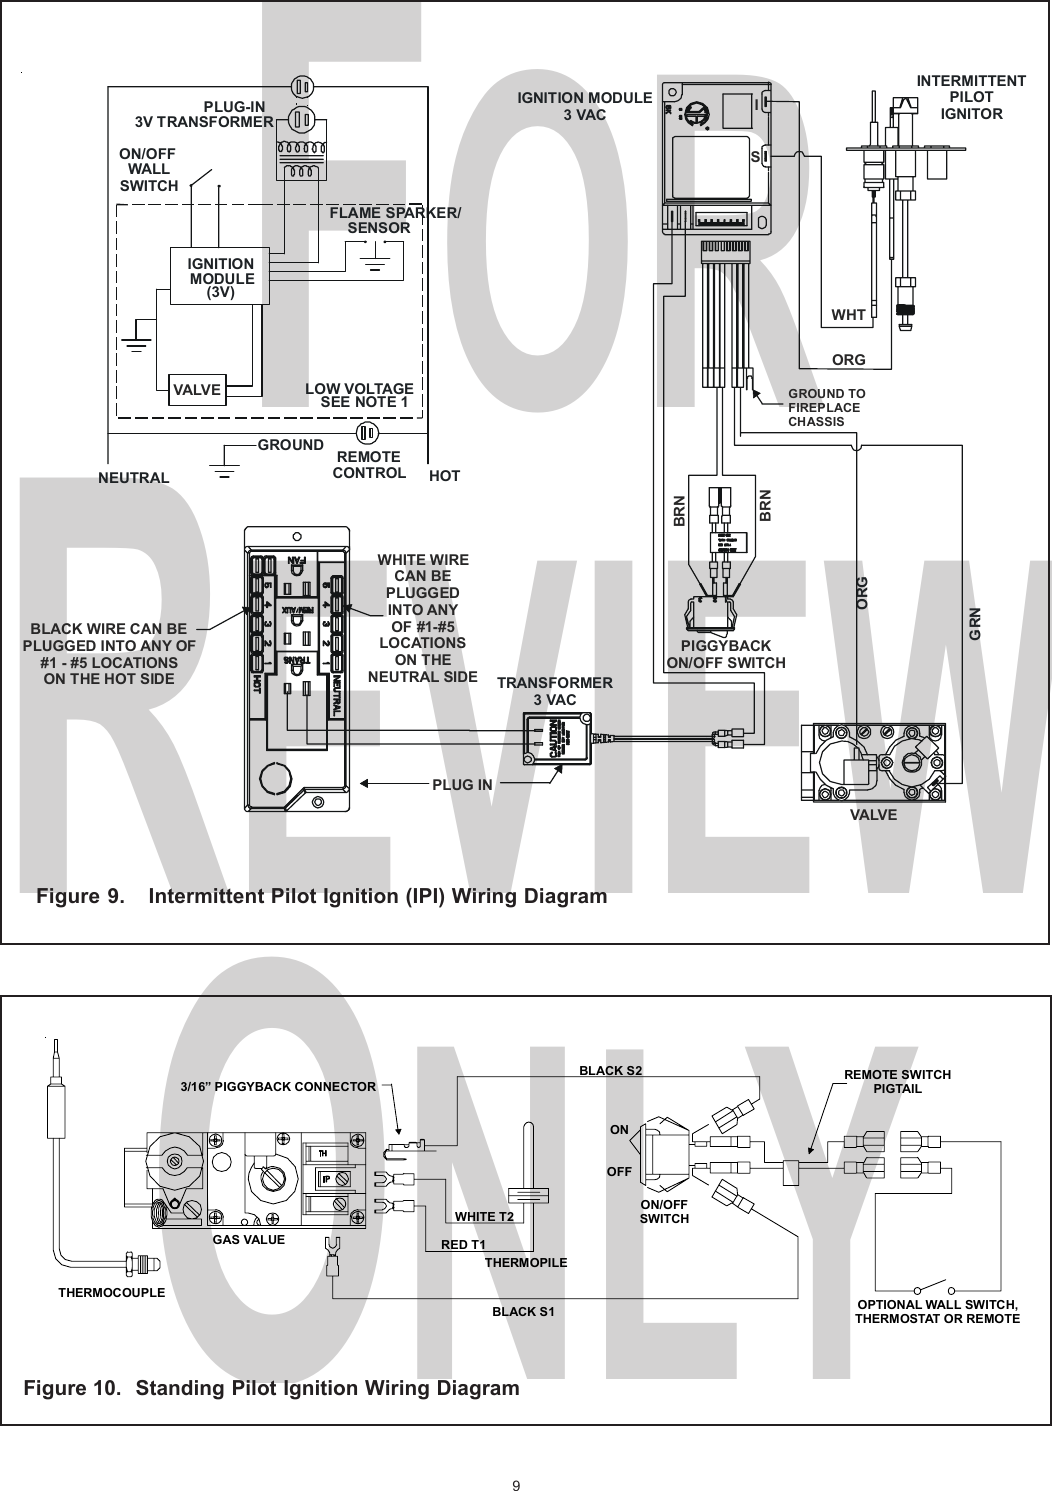 9FORREVIEWONLYFigure 10. Standing Pilot Ignition Wiring DiagramBLACK S2ONOFFON/OFFSWITCHWHITE T2RED T1THERMOPILEGAS VALUEBLACK S13/16” PIGGYBACK CONNECTORTHERMOCOUPLEREMOTE SWITCHPIGTAILOPTIONAL WALL SWITCH,THERMOSTAT OR REMOTEFigure 9. Intermittent Pilot Ignition (IPI) Wiring DiagramIGNITION MODULE3 VACTRANSFORMER3 VACGRNORGINTERMITTENTPILOTIGNITORIGNITIONMODULE(3V)ON/OFFWALL SWITCHLOW VOLTAGEPLUG-IN3V TRANSFORMERNEUTRAL HOTGROUNDFLAME SPARKER/SENSORREMOTECONTROLSEE NOTE 1ORGWHTVALVEPIGGYBACK ON/OFF SWITCHWHITE WIRECAN BEPLUGGEDINTO ANYOF #1-#5LOCATIONSON THENEUTRAL SIDEBLACK WIRE CAN BEPLUGGED INTO ANY OF#1 - #5 LOCATIONSON THE HOT SIDEBRNBRNVALVEPLUG INGROUND TOFIREPLACECHASSISSI